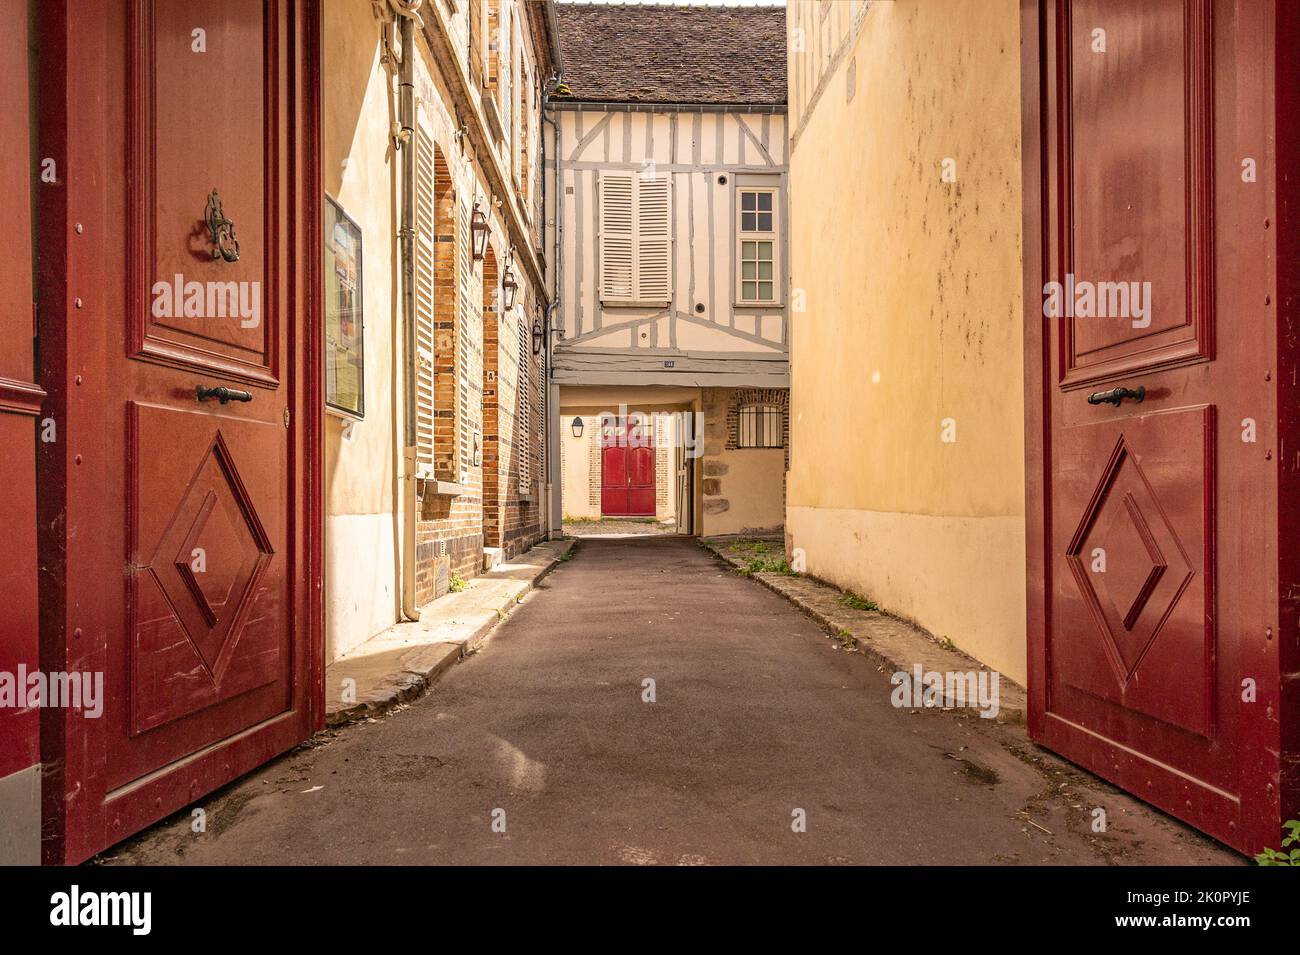 Behind high wooden gates, interior courtyards are typical of traditonal town houses at Sens, Burgundy, France Stock Photo